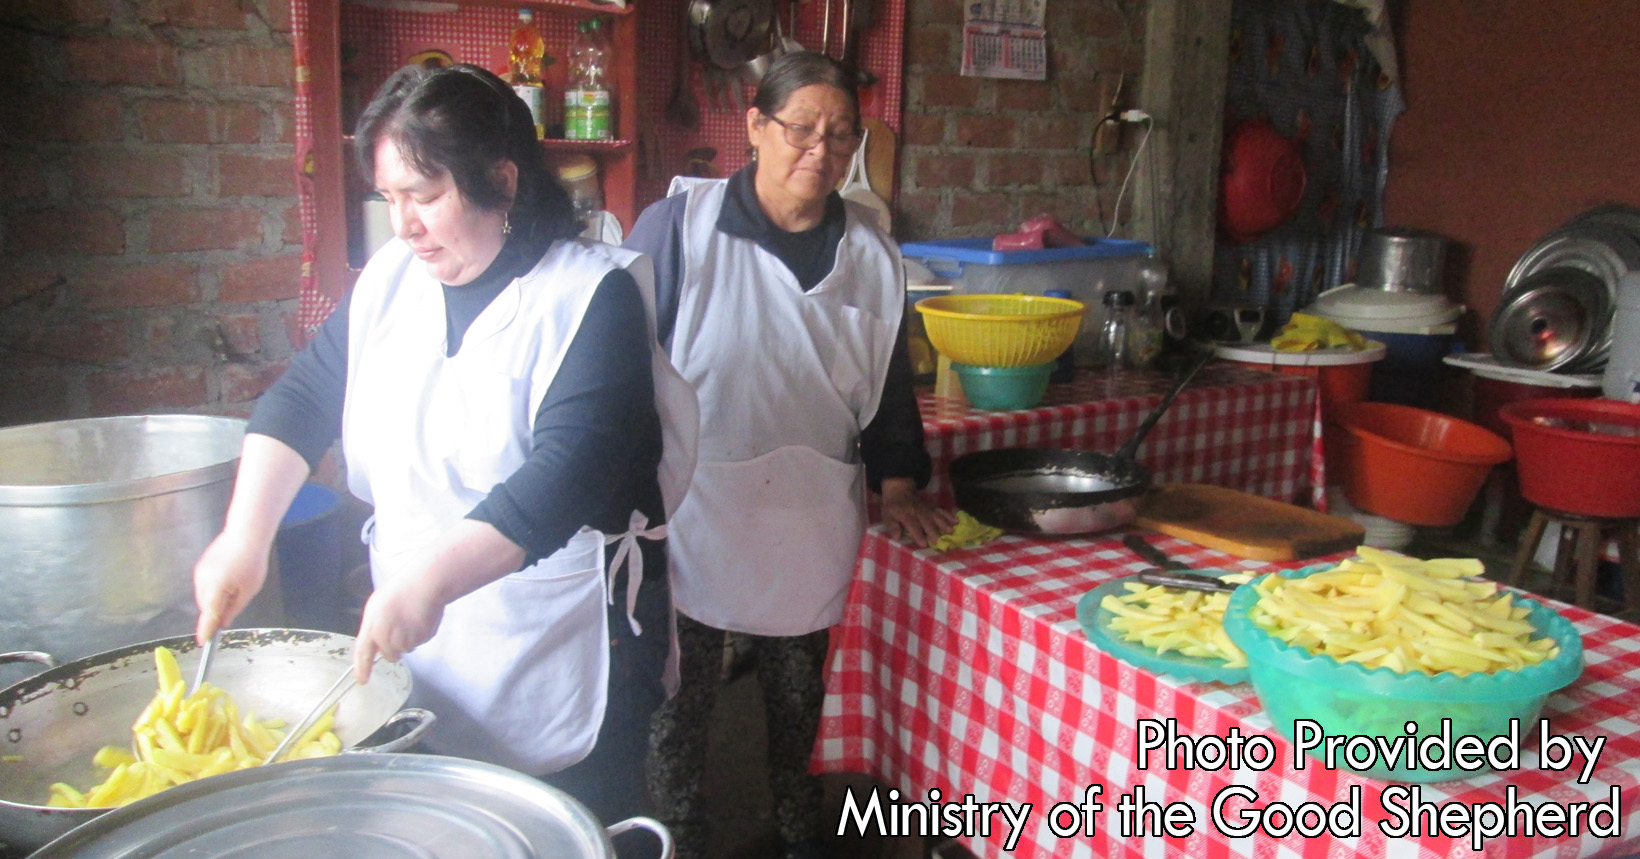 Two ladies in the kitchen are preparing a meal for the young kids. Wearing their aprons, they are preparing some pasta with all the utensils available to them.